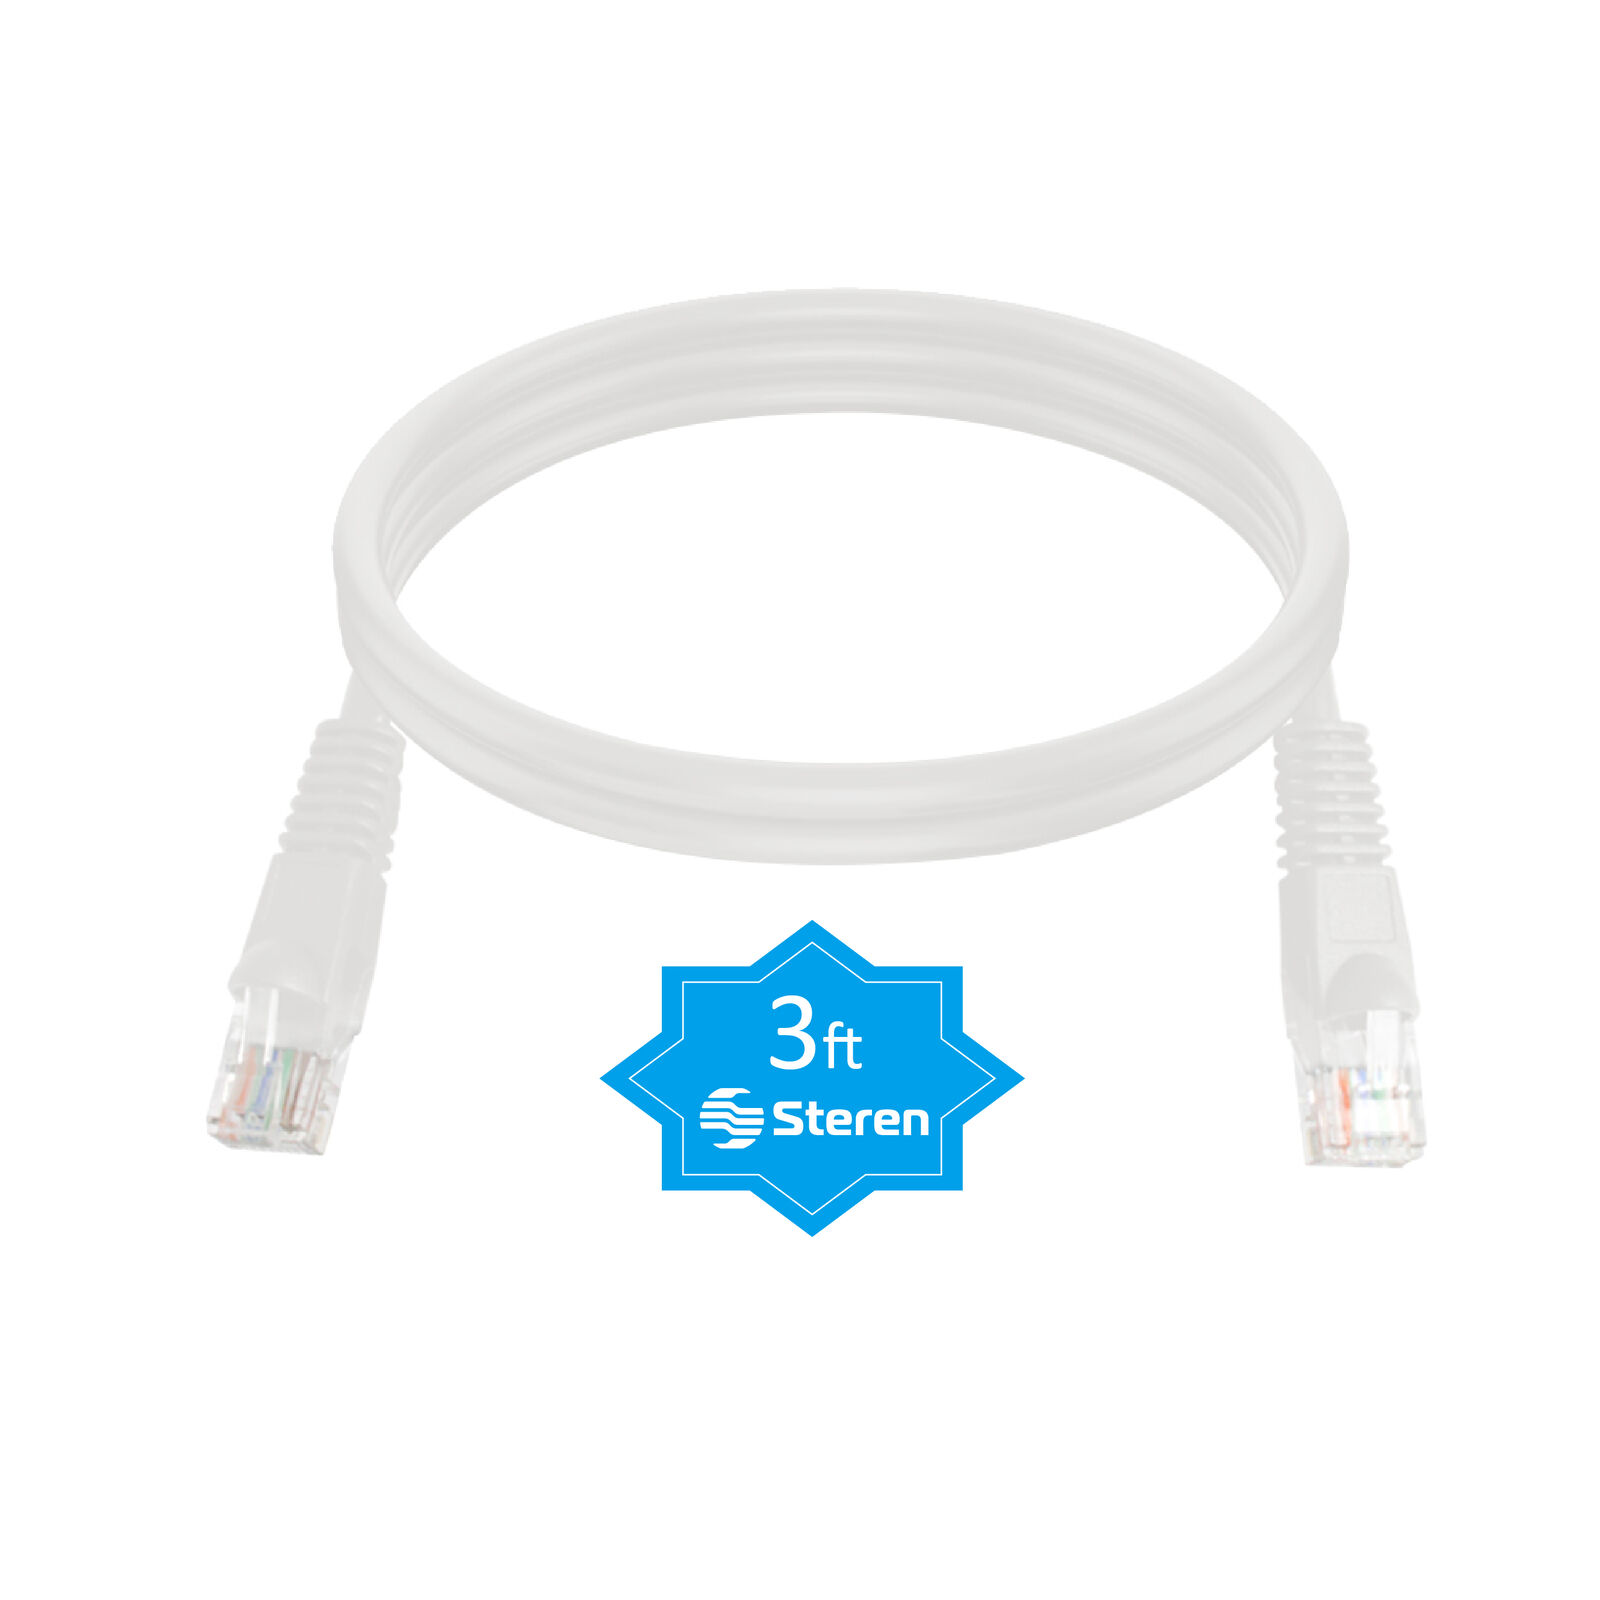 Steren 3ft Cat5e Patch Cord Non-Booted UTP cULus White